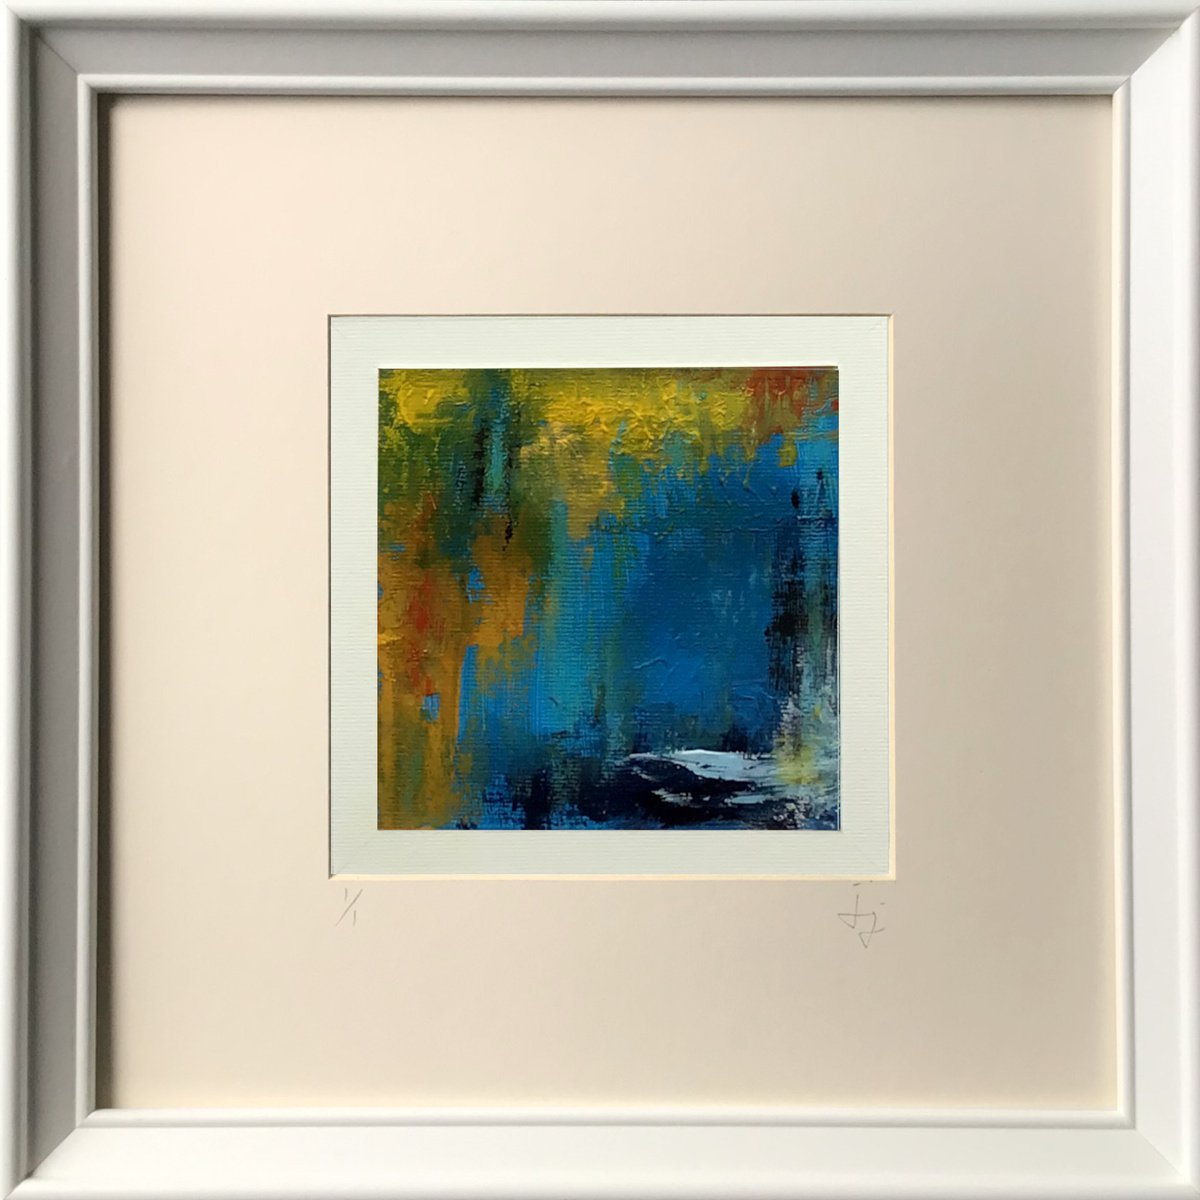 Fuse 4 (Blue) - Framed, ready to hang painting by Jon Joseph